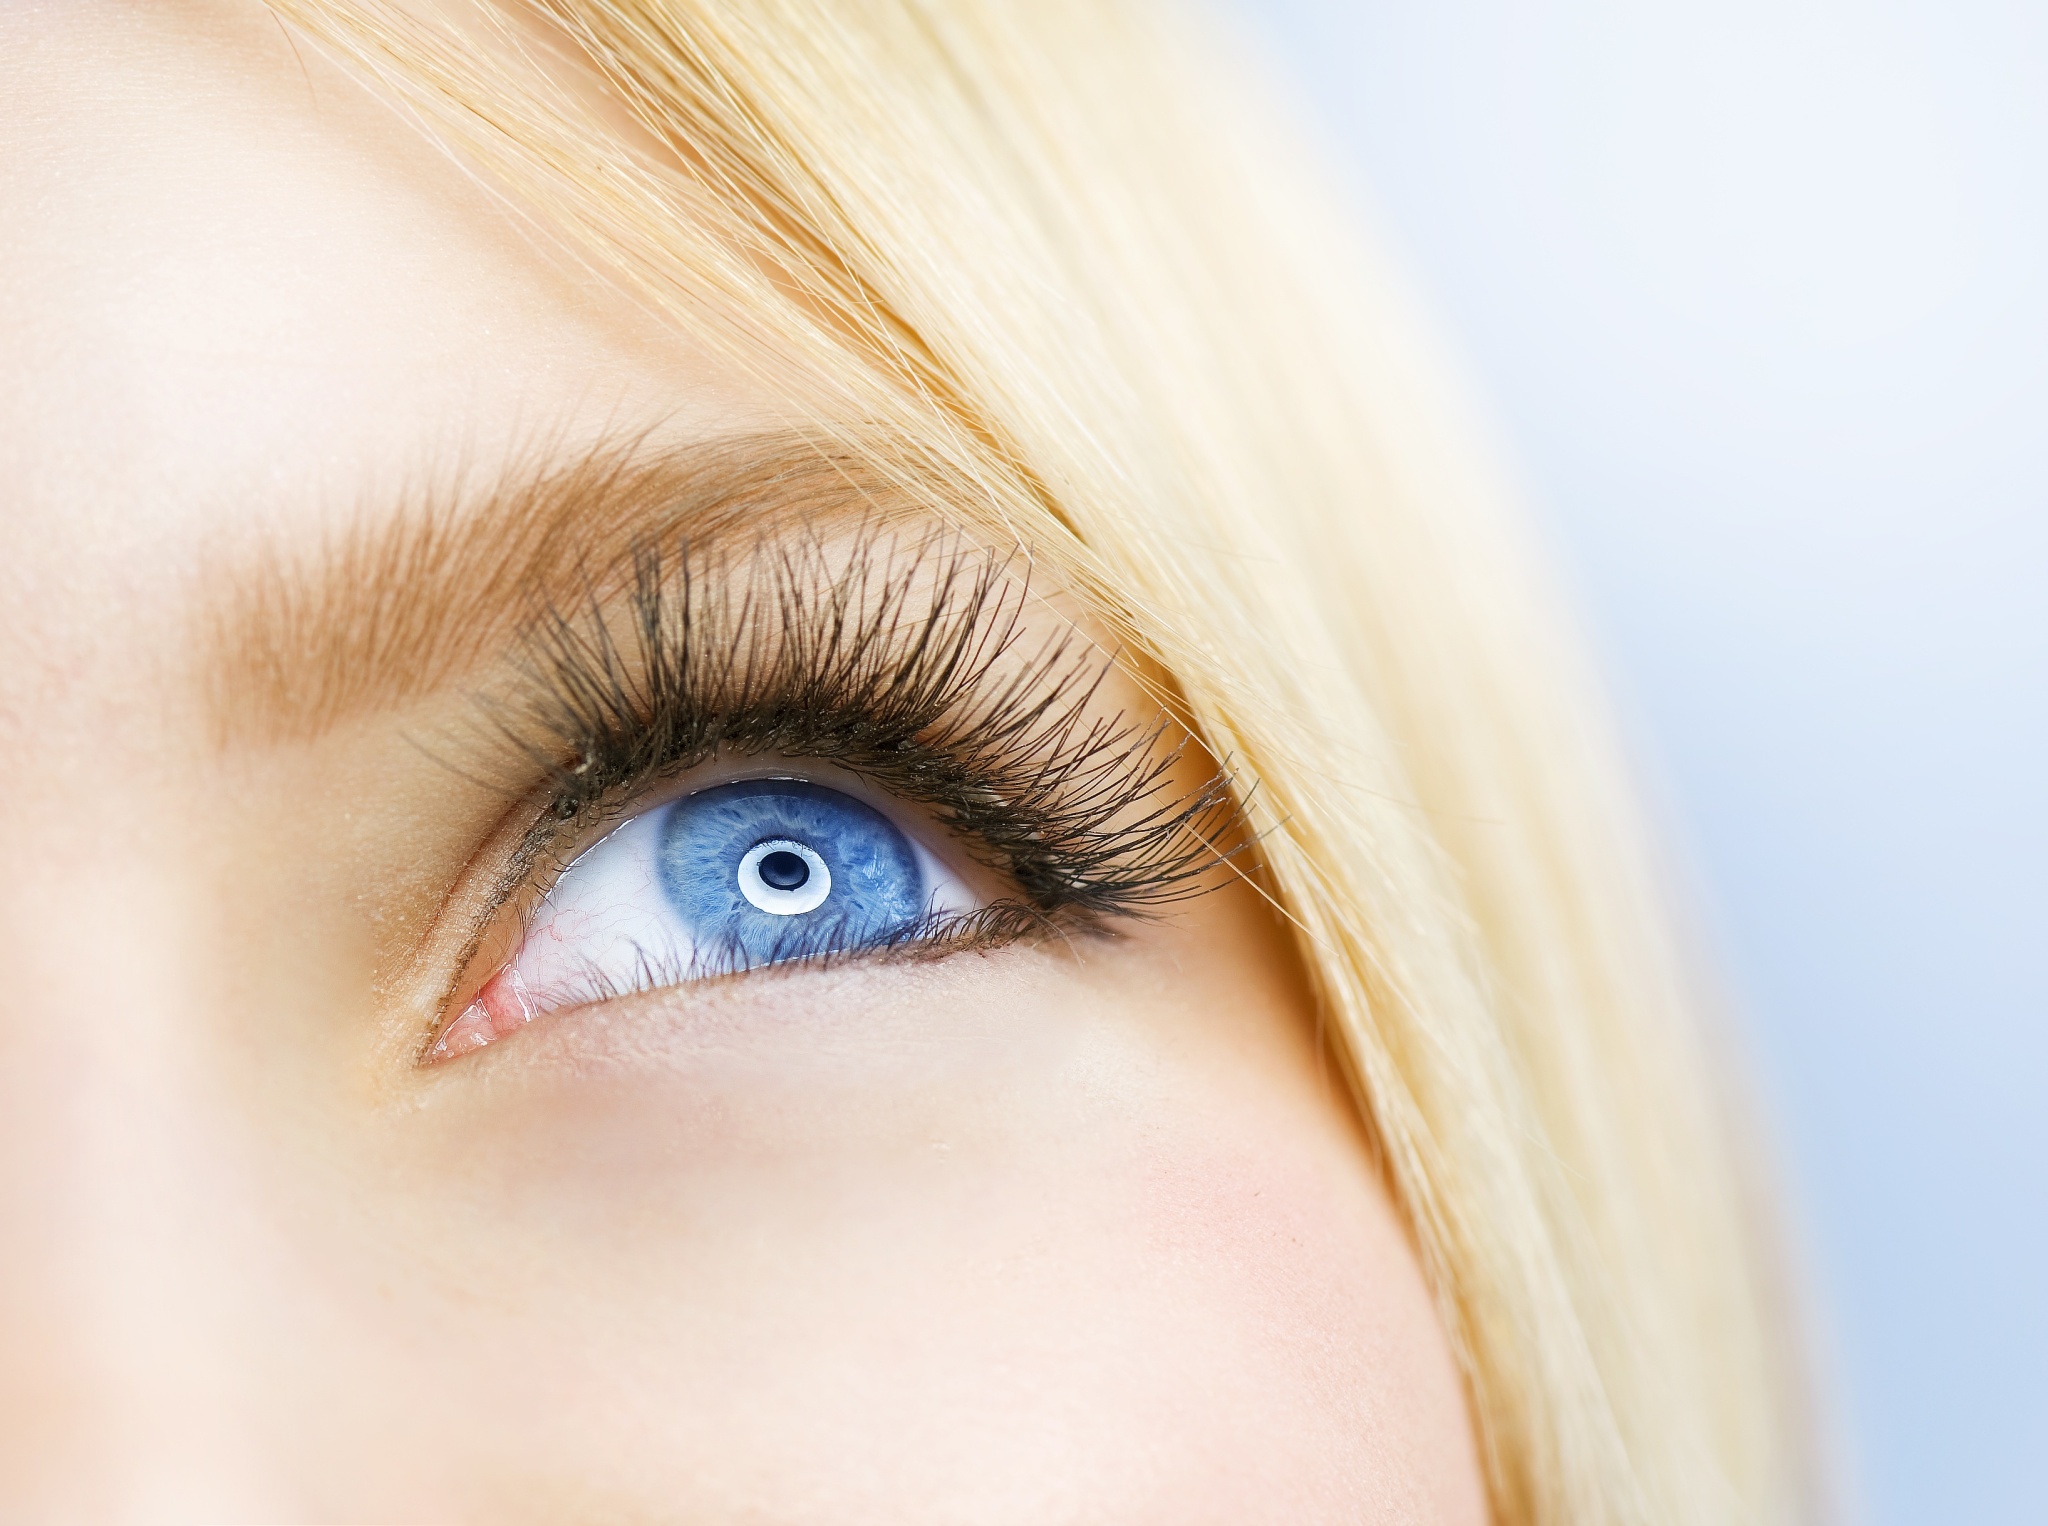 Cataract Surgery in St. Louis